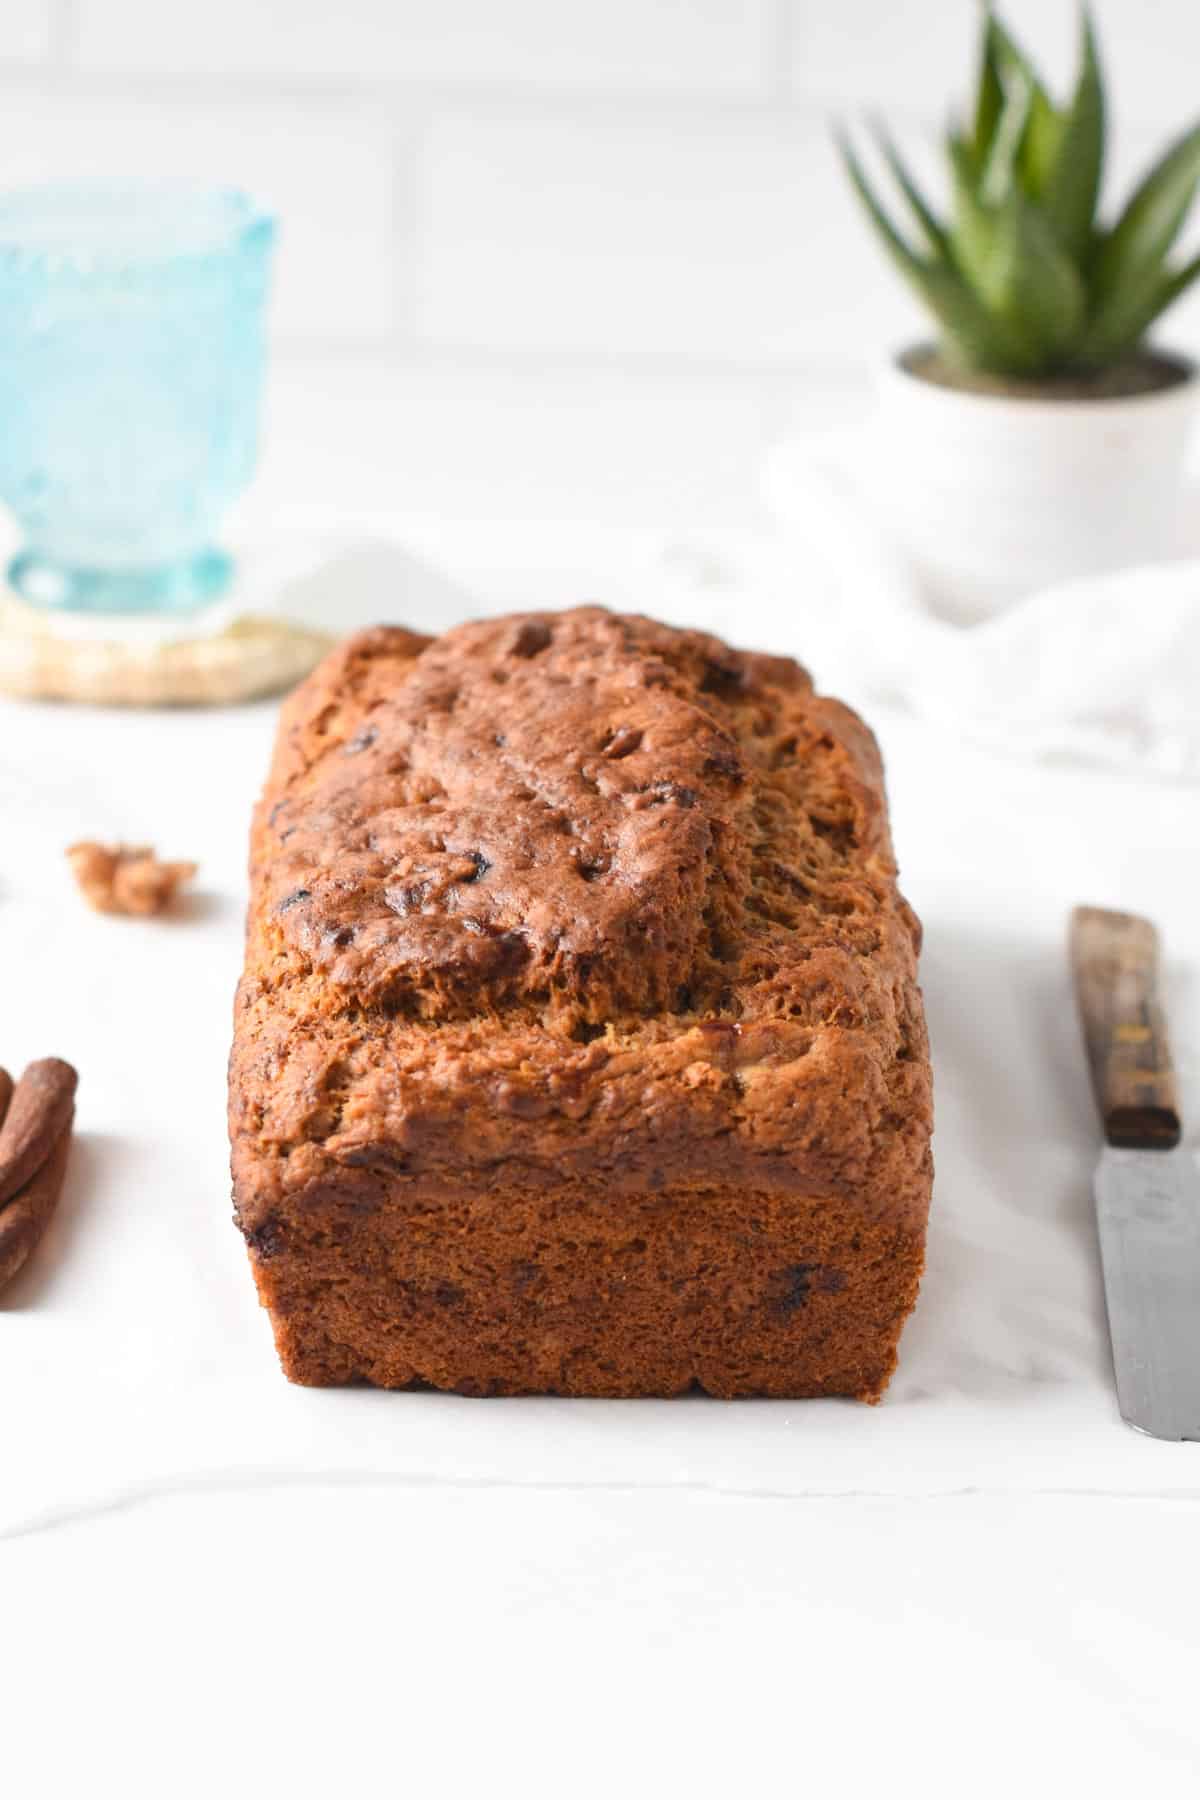 Eggless Banana Bread loaf on a white table with a small bread knife next to it.